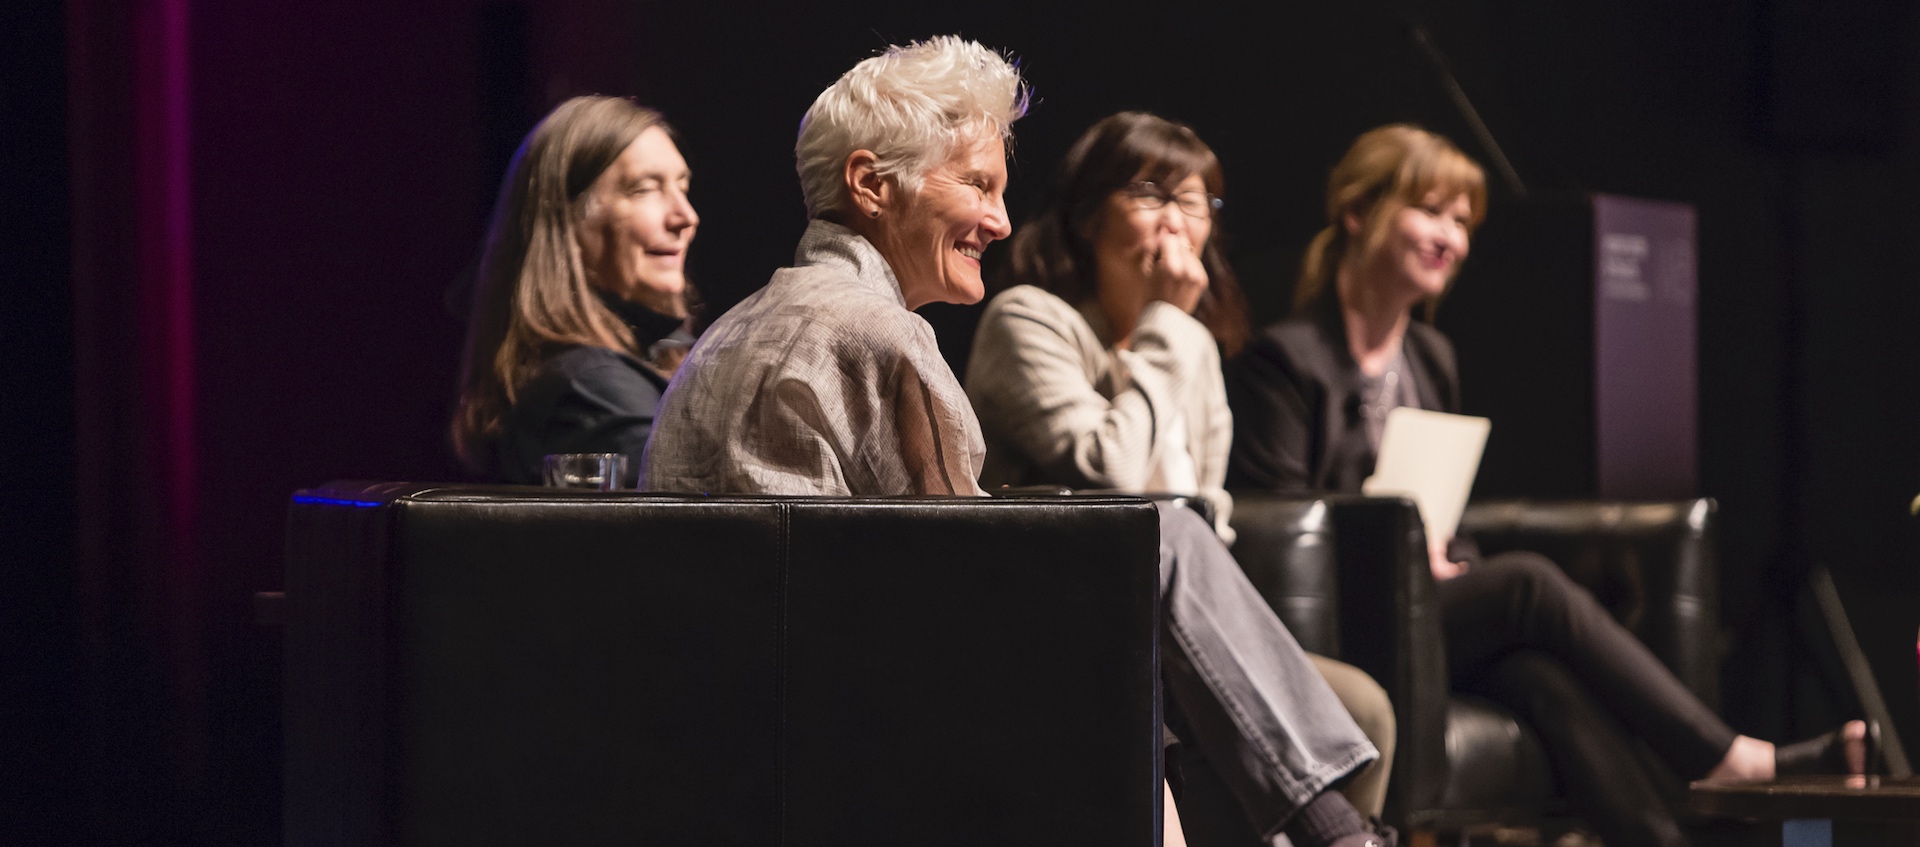 Artists Ann Hamilton, Jenny Holzer, and Maya Lin sitting on the stage of Mershon Auditorium, discussing their work with Wexner Center director Johann Burton as part of opening events for the fall 2019 exhibition HERE at the Wexner Center for the Arts. Photo by Katie Gentry